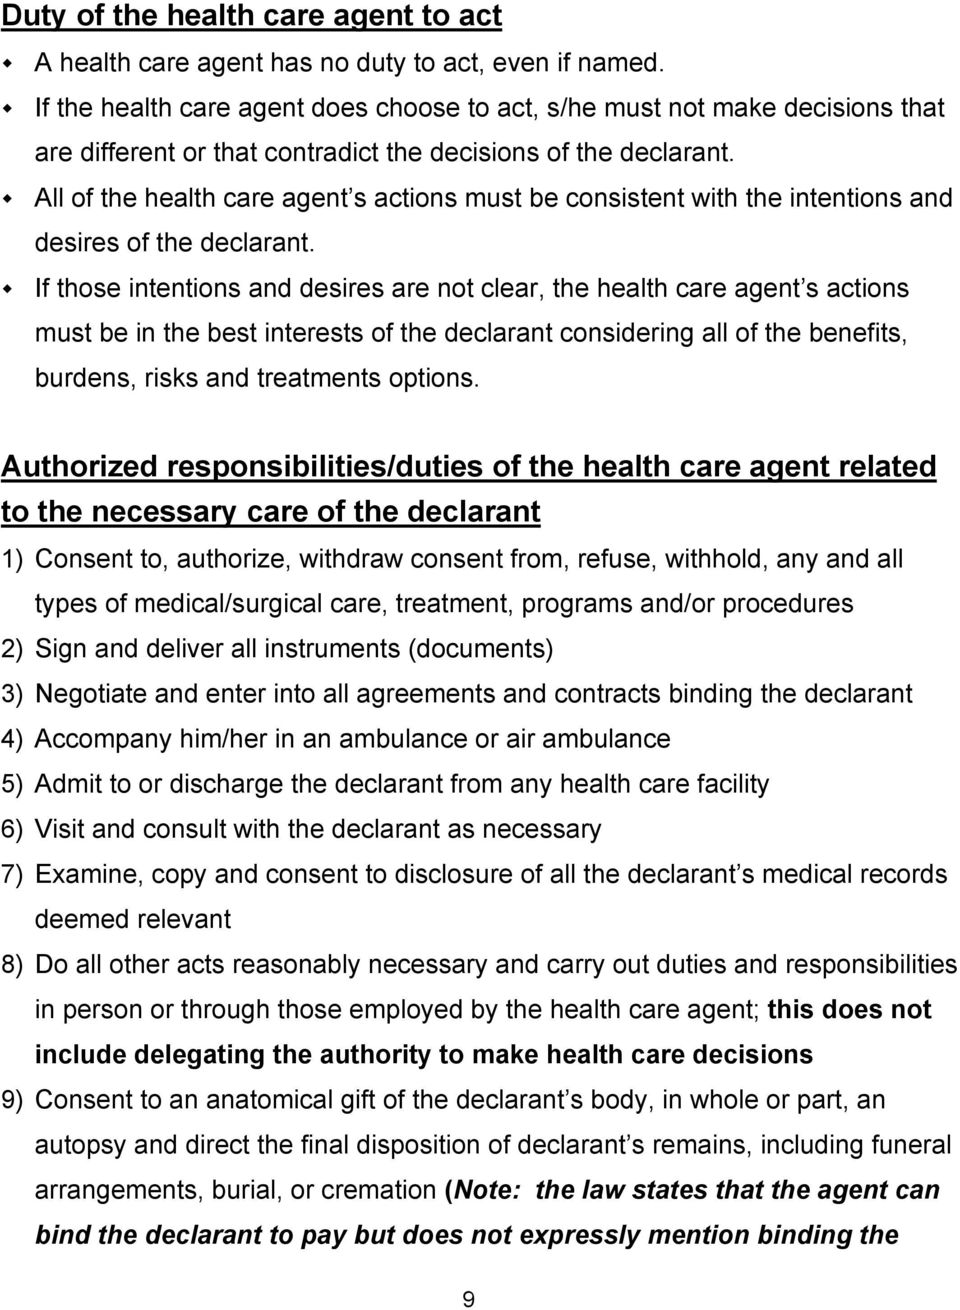 All of the health care agent s actions must be consistent with the intentions and desires of the declarant.